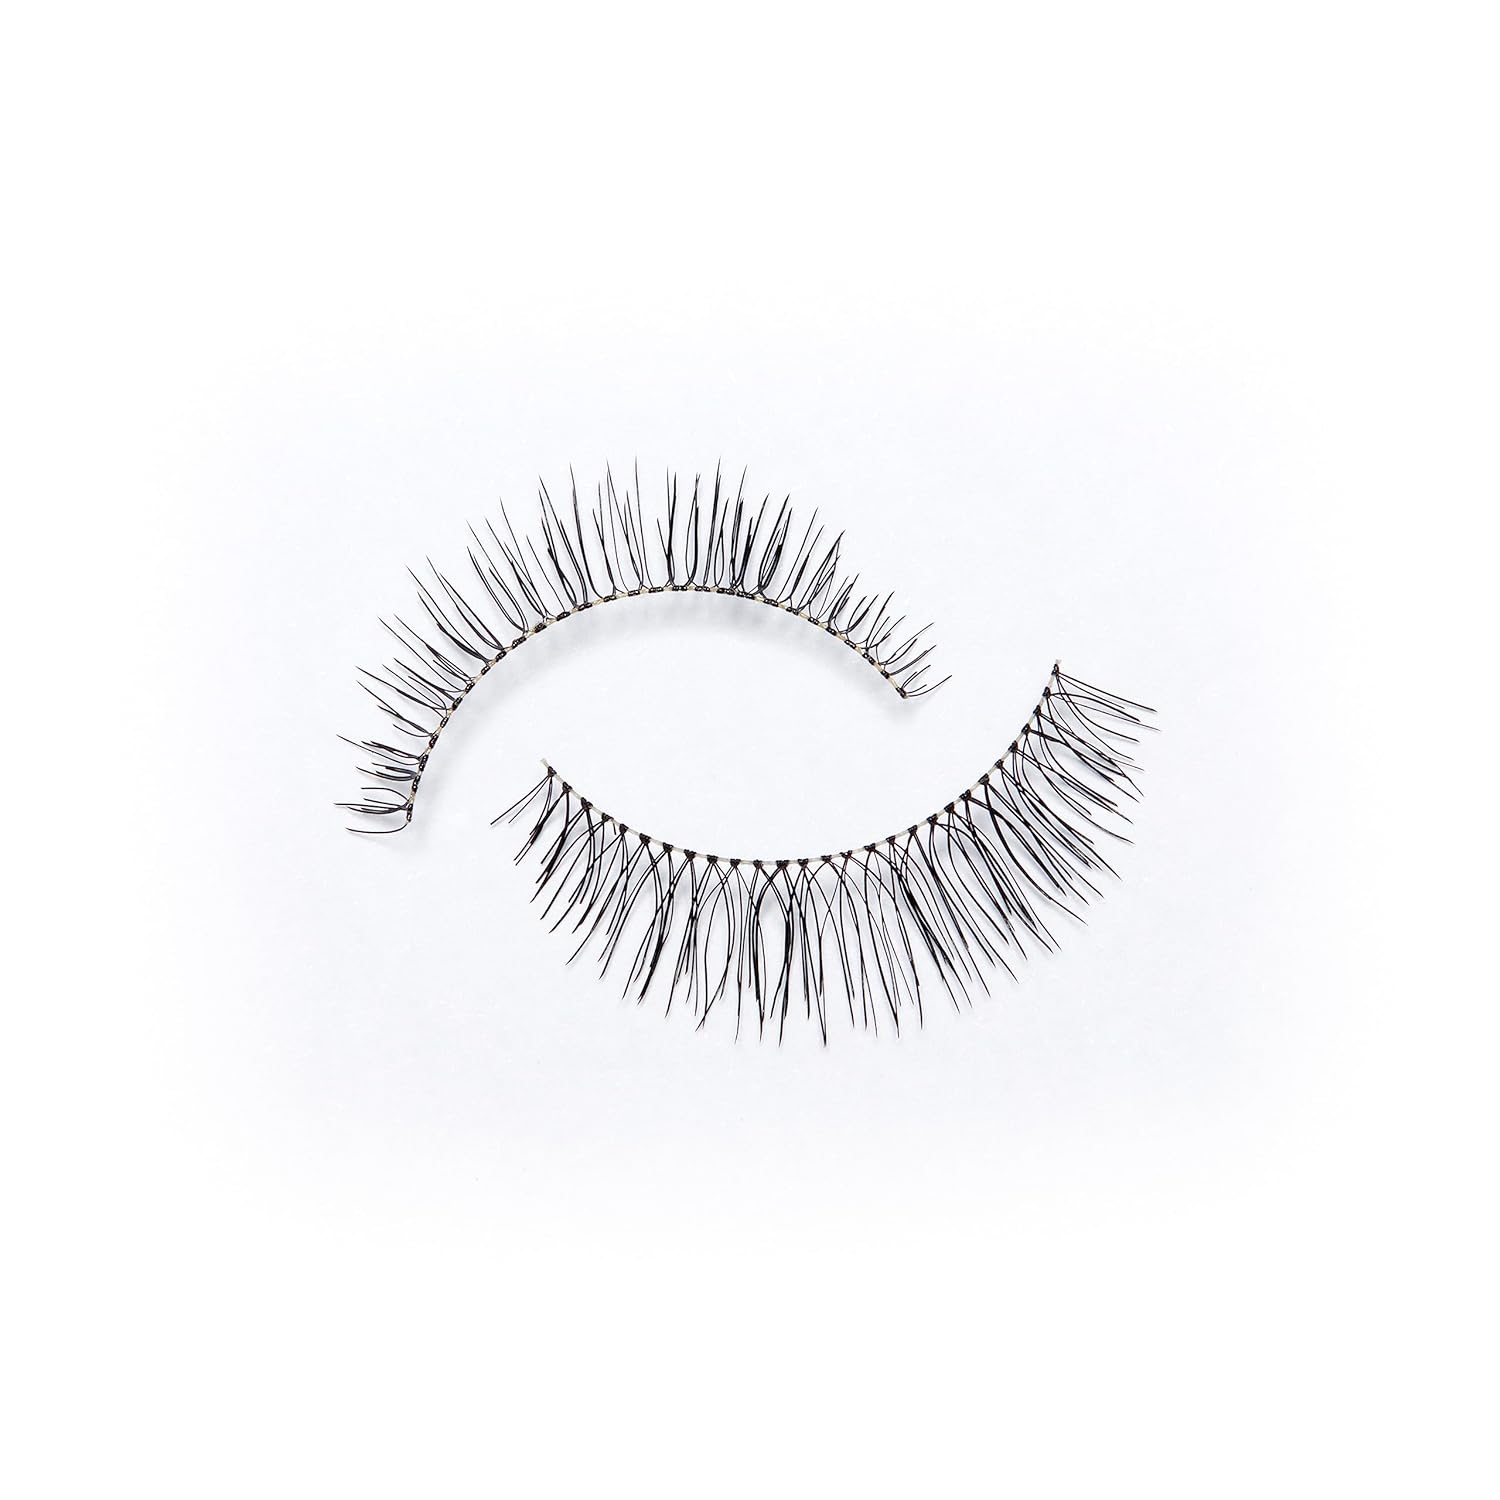 Eylure Naturals False Lashes, Style No. 003, Reusable, Adhesive Included, 1 Pair